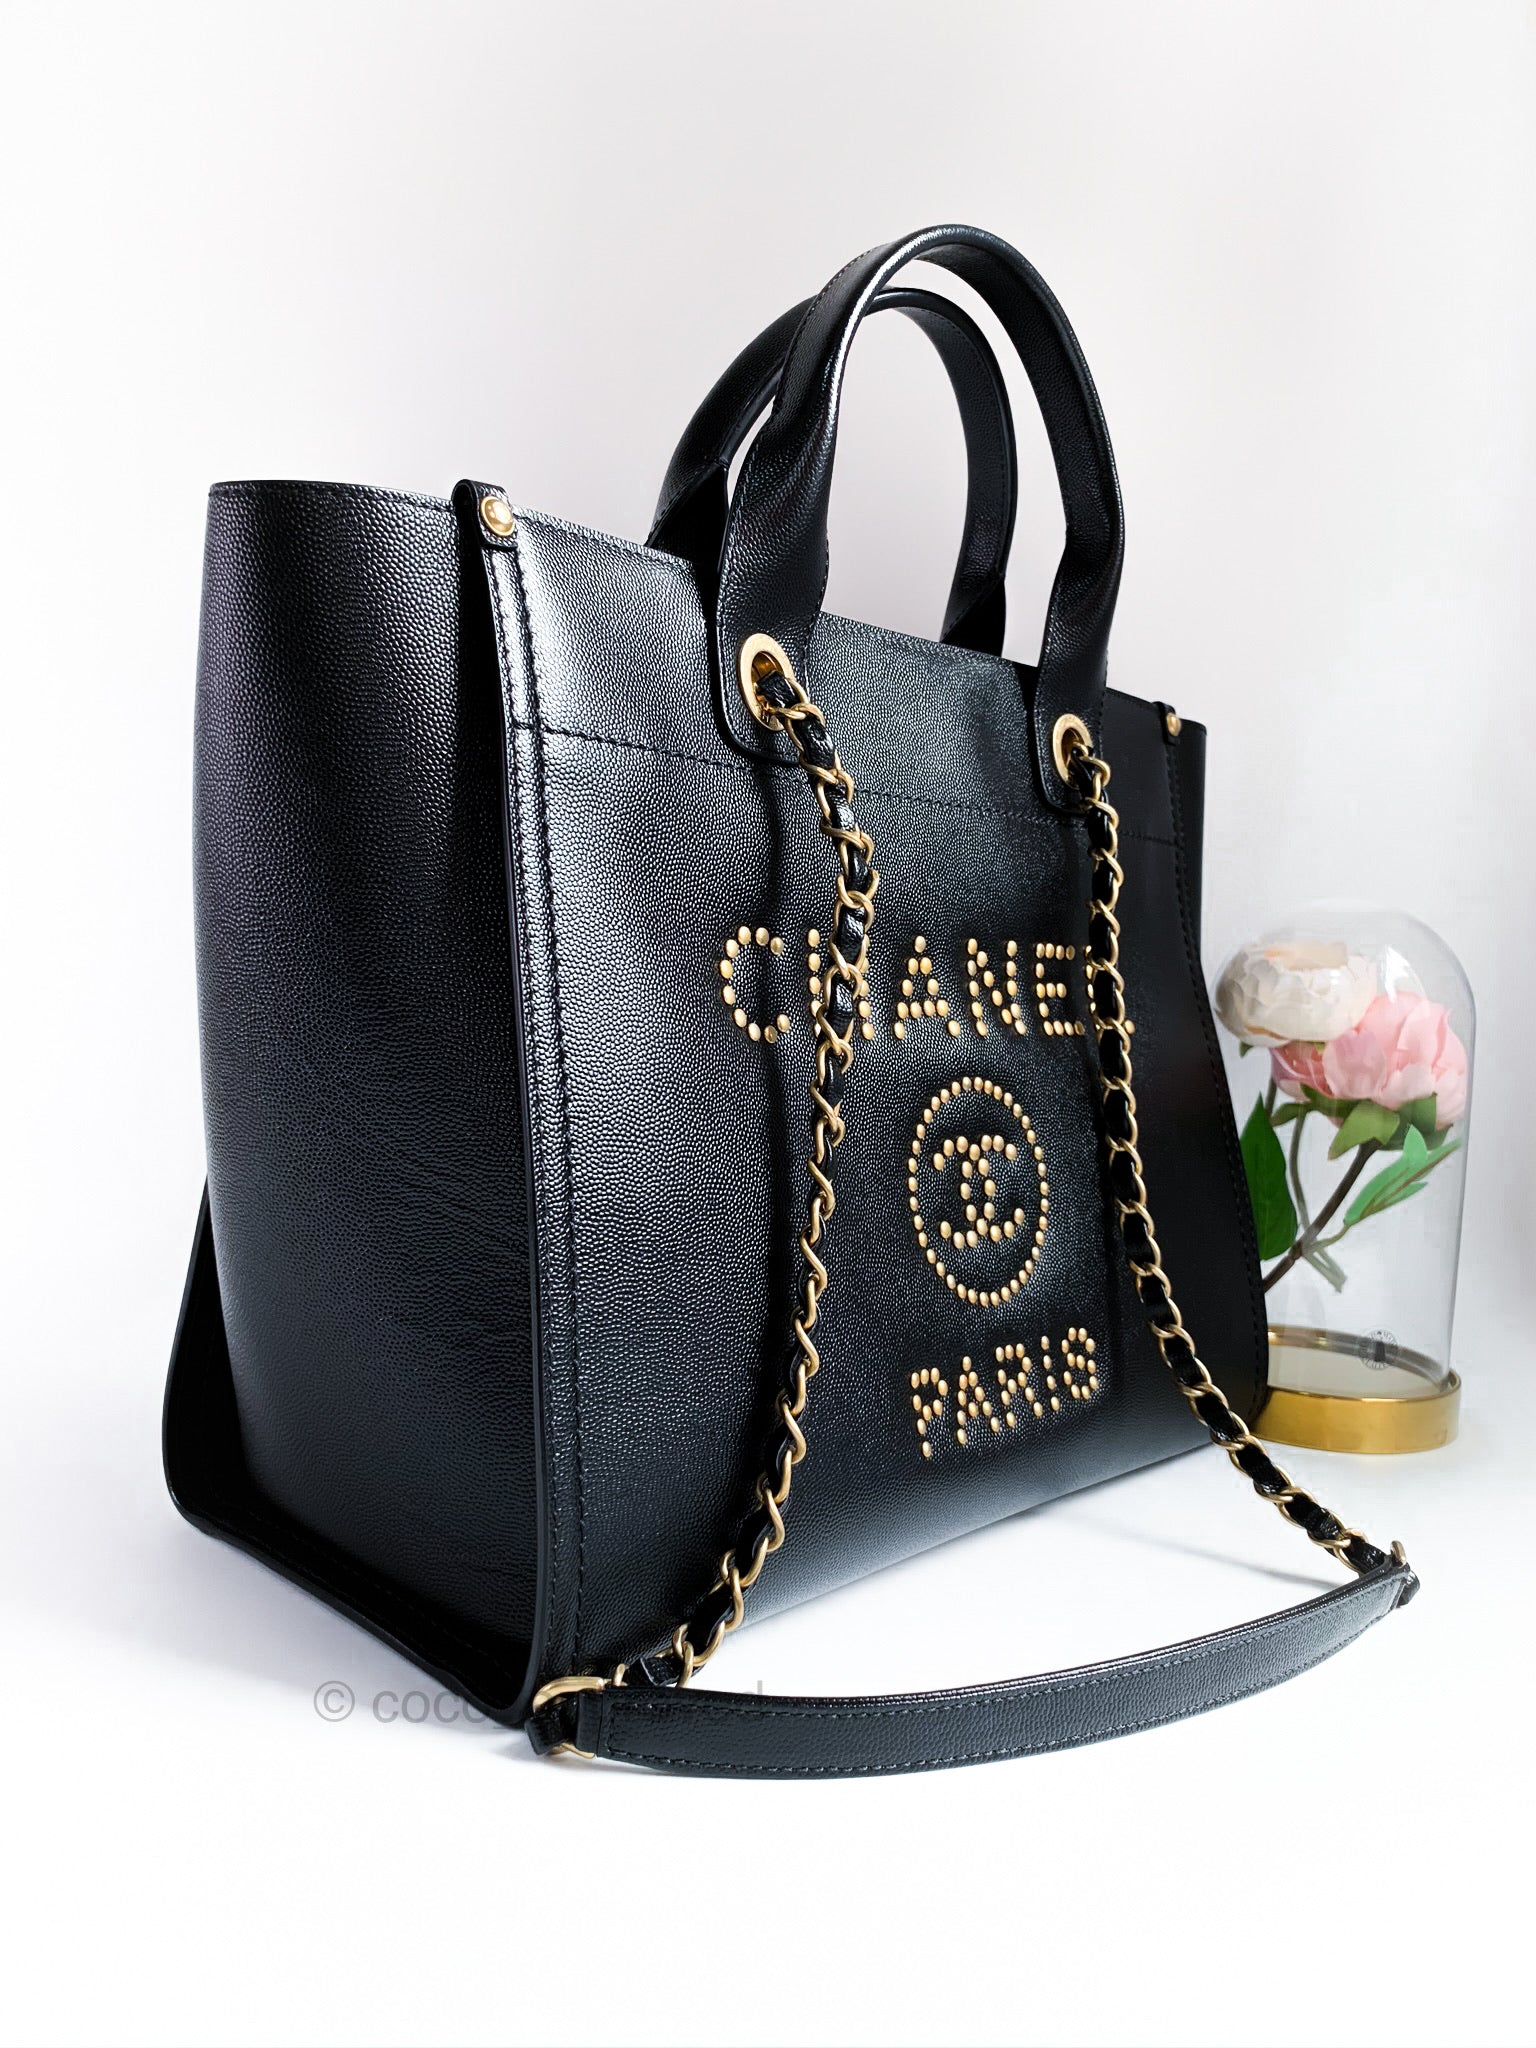 Chanel Black Caviar Leather Small Studded Deauville Tote Chanel